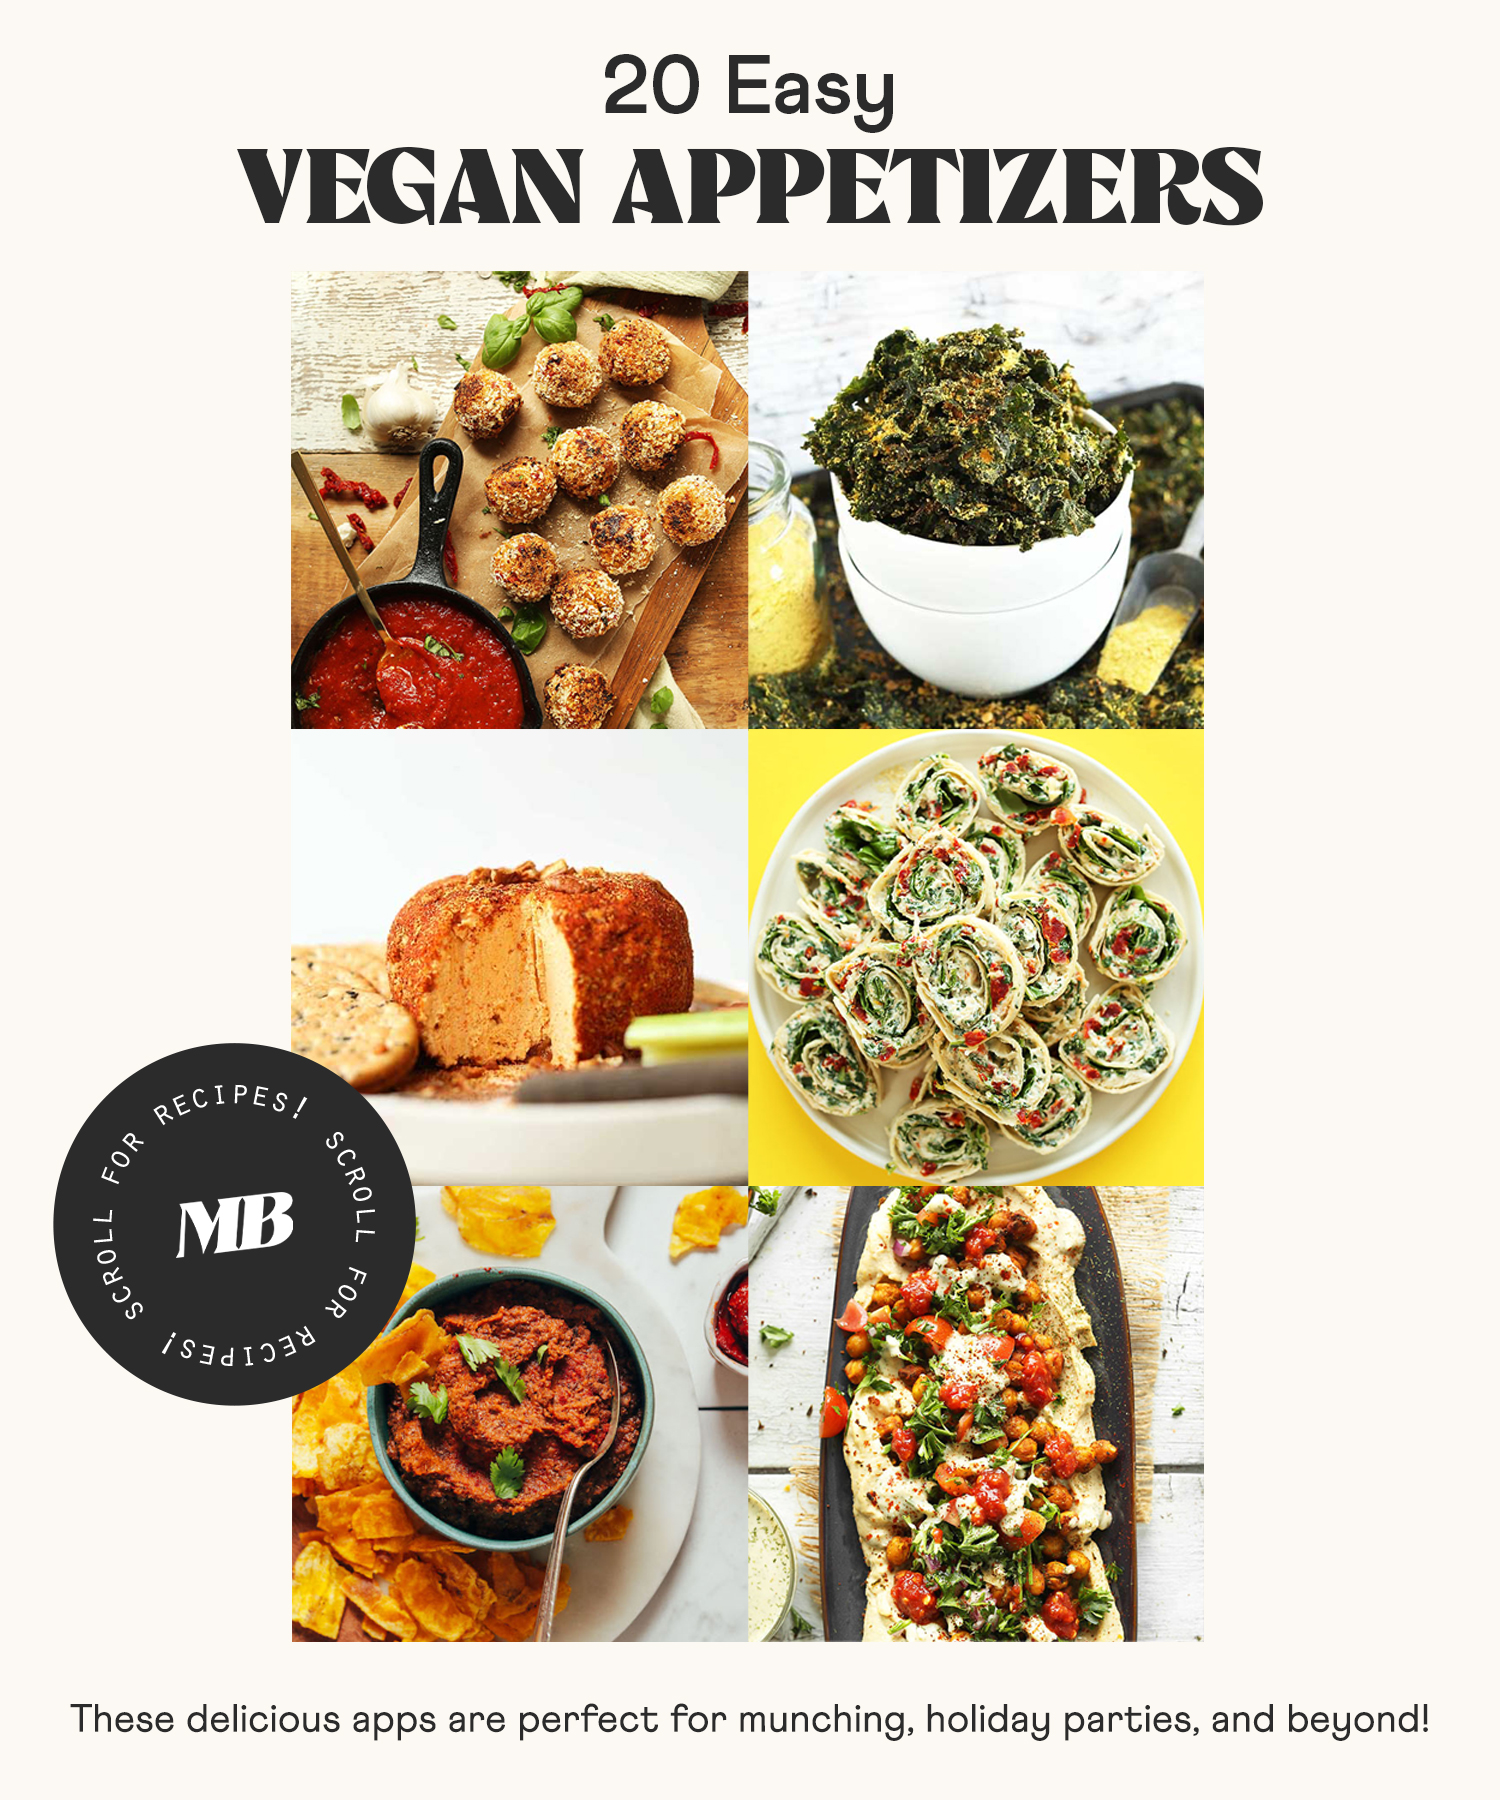 Arancini, kale chips, cheese ball, and photos of other easy vegan appetizer recipes